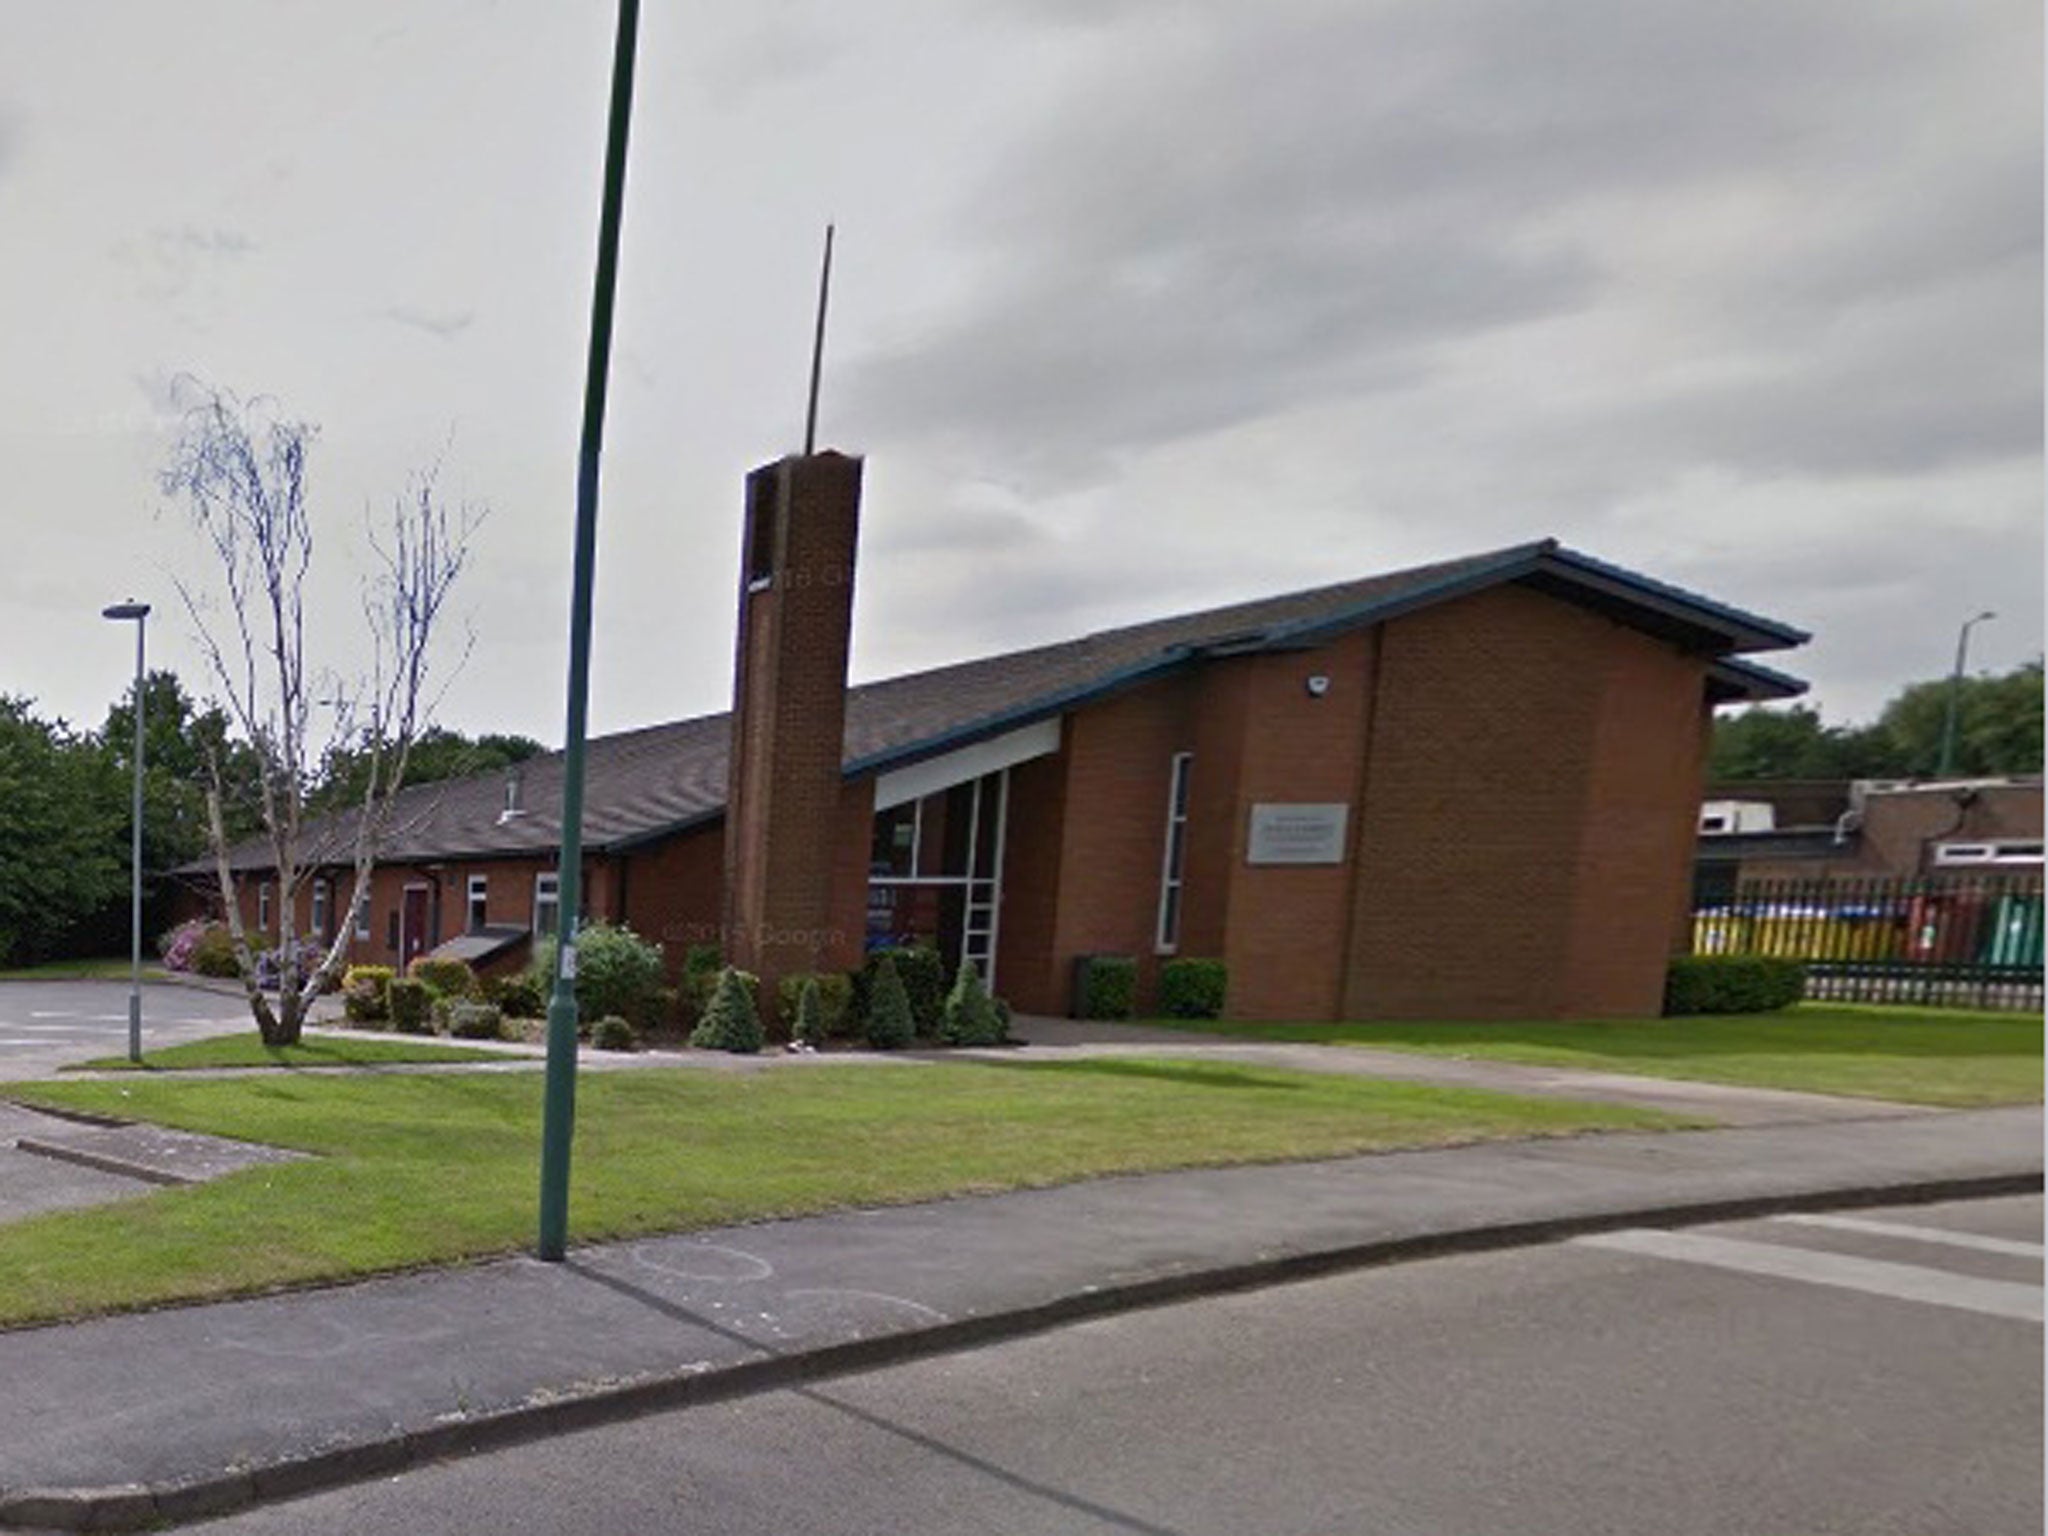 Church of Latter Day Saints on Clopton Crescent in Chelmsley Wood, where a bishop was attacked